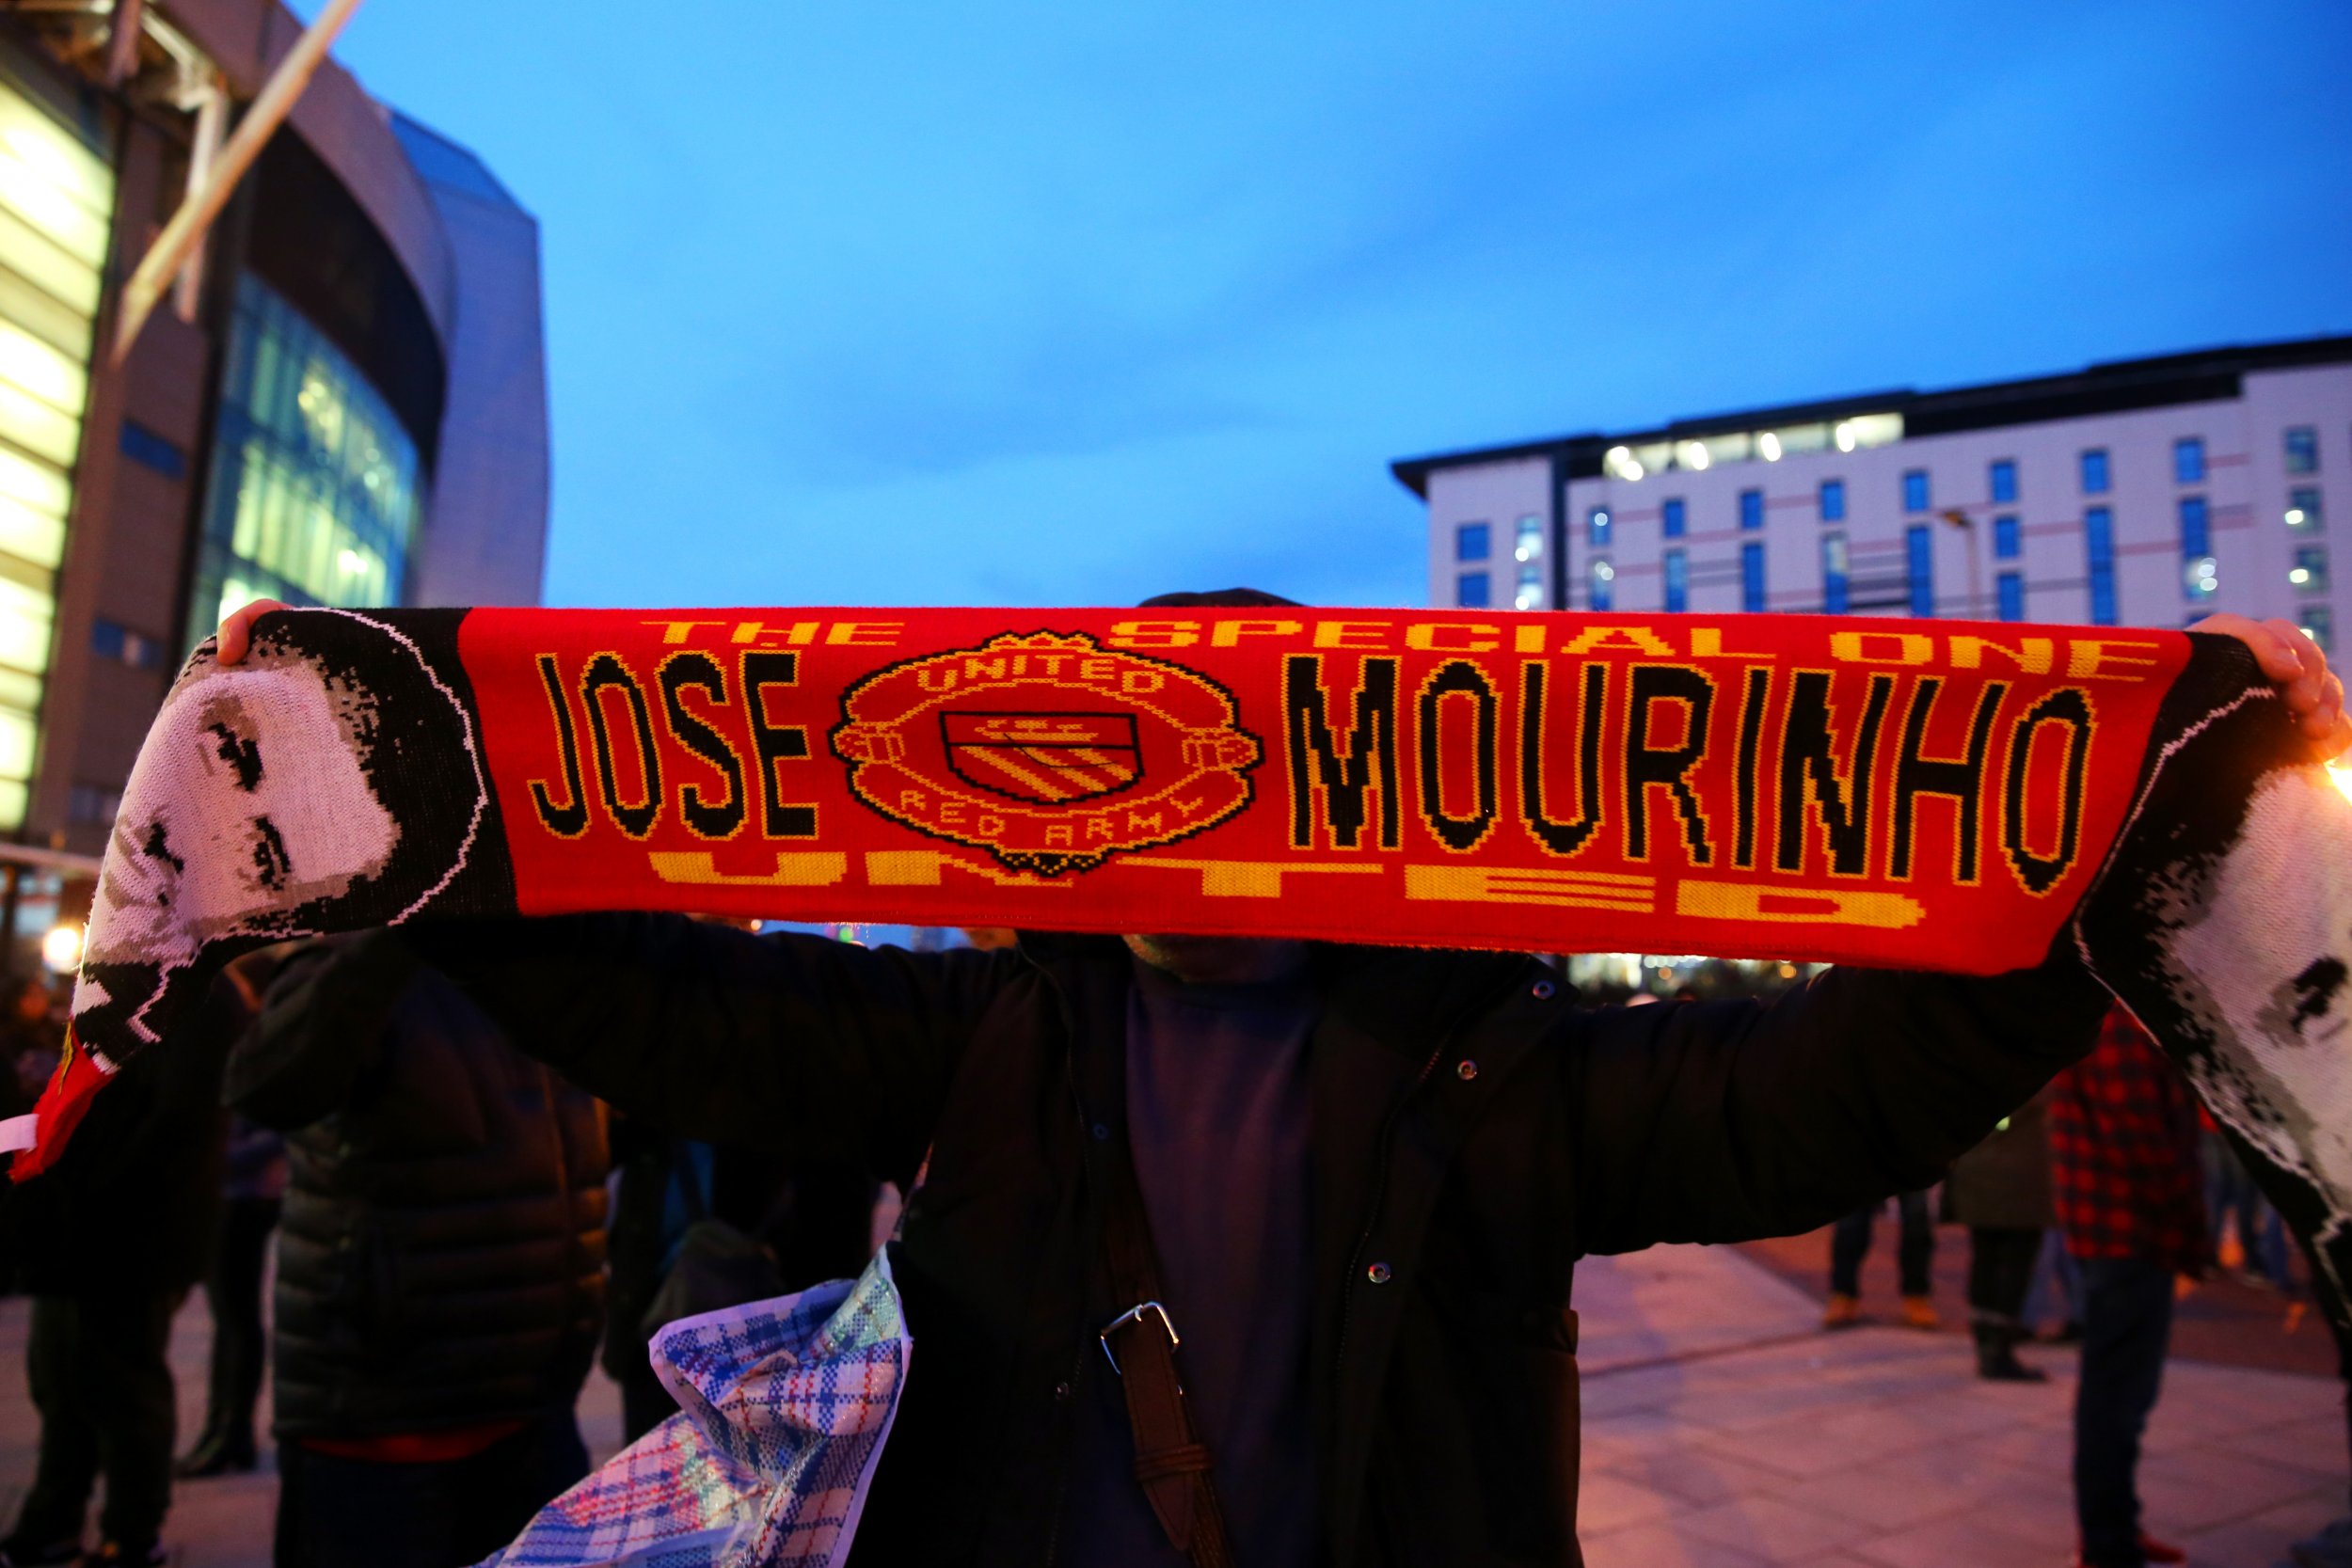 A Manchester United fan displays his support for Jose Mourinho at Old Trafford.